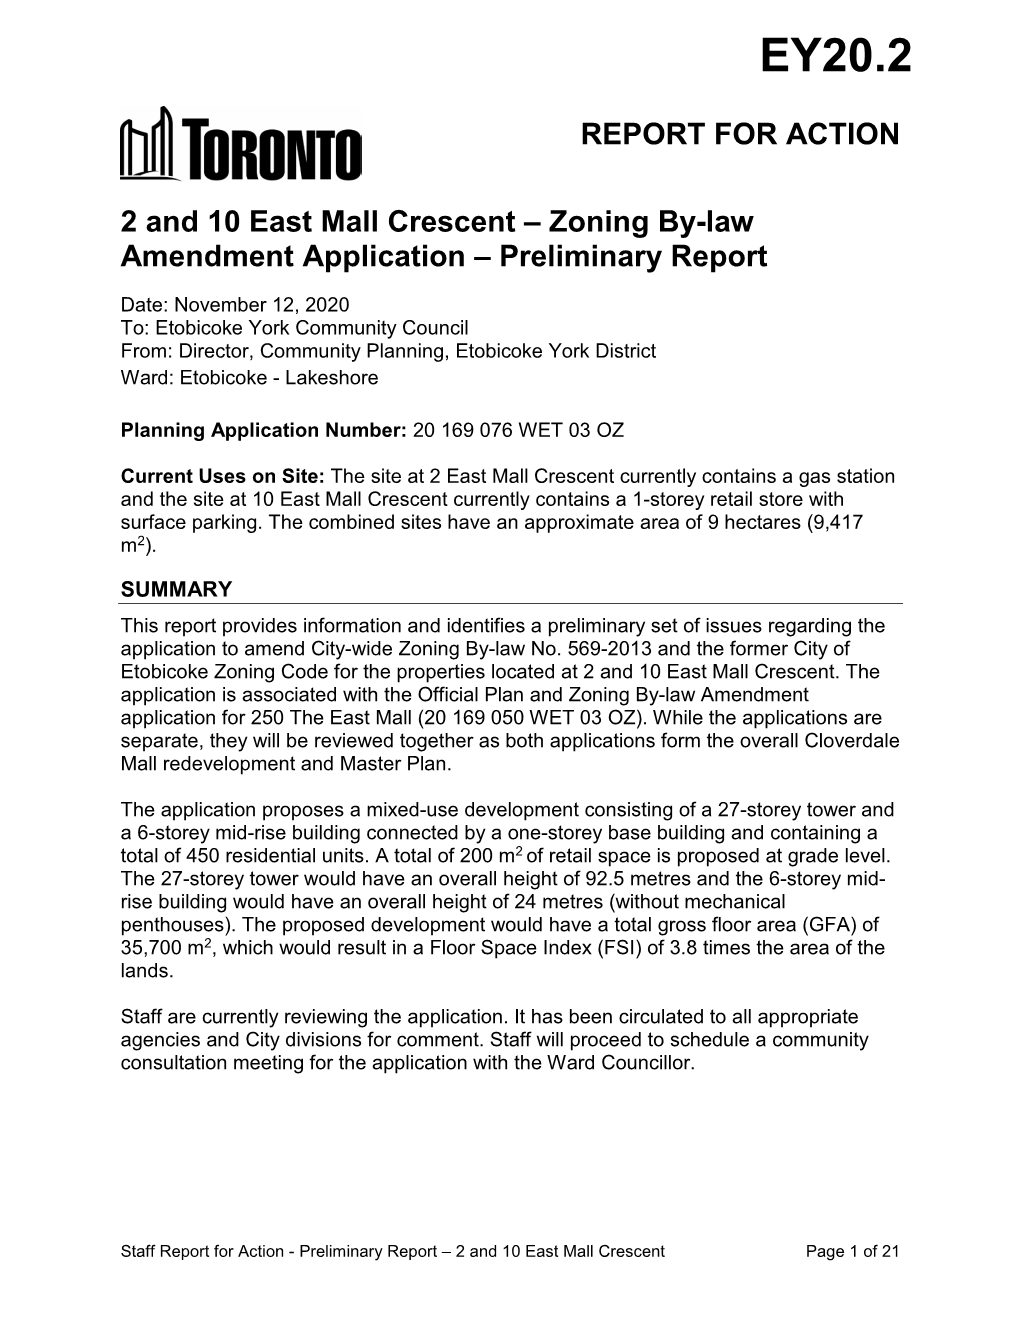 2 and 10 East Mall Crescent – Zoning By-Law Amendment Application – Preliminary Report